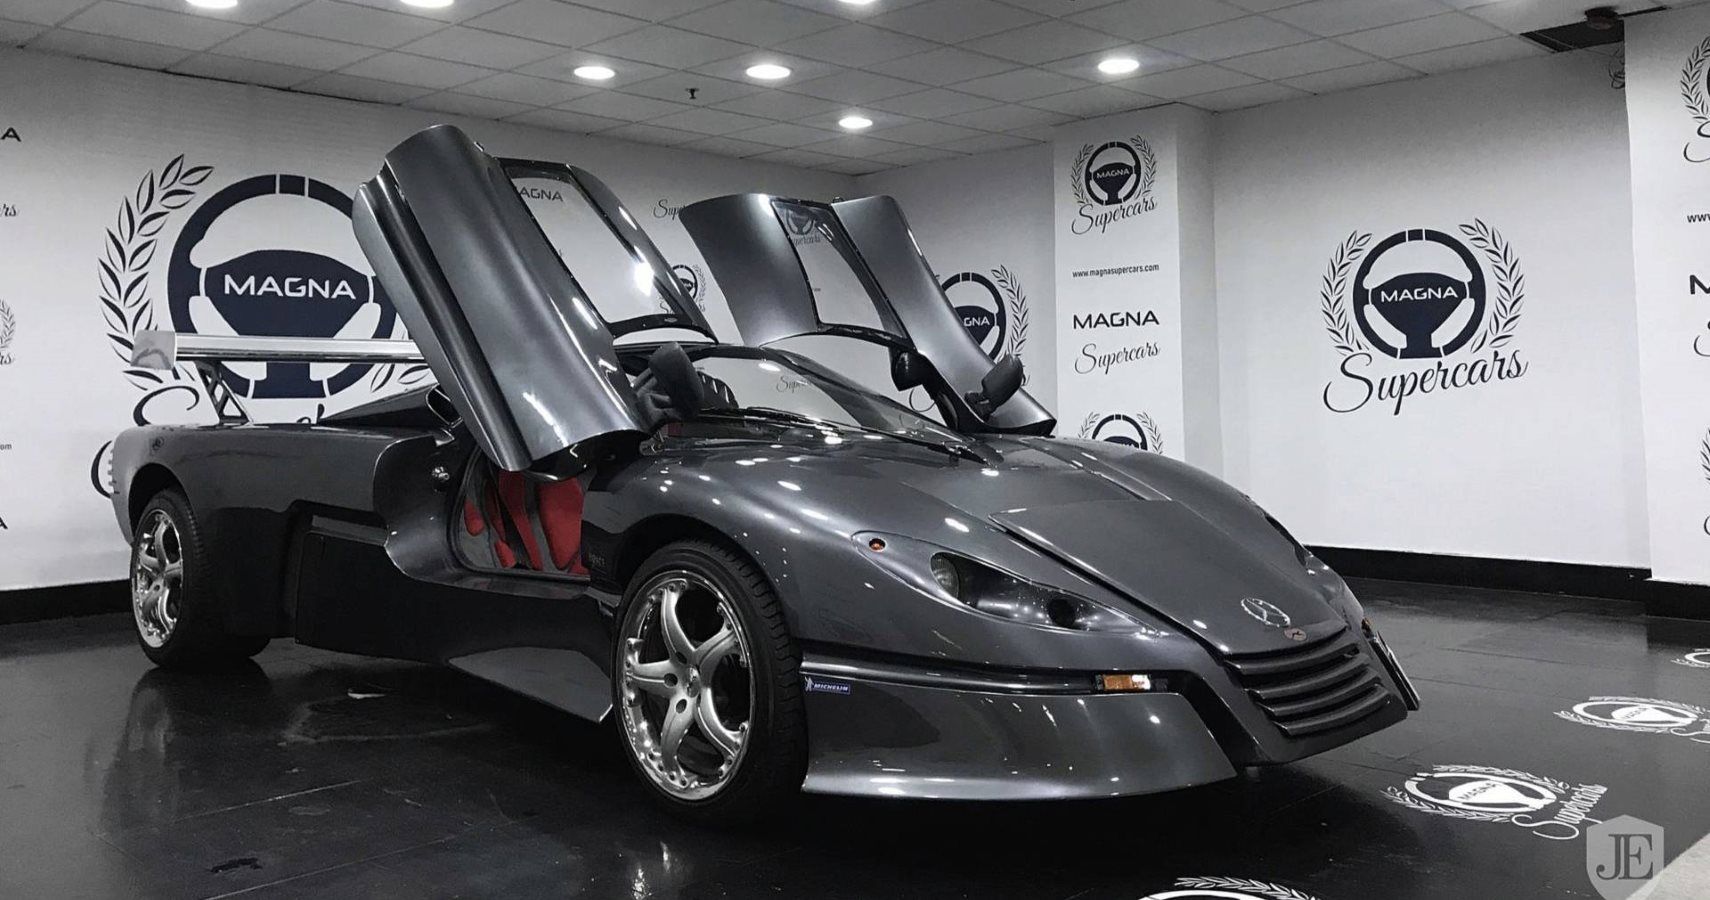 Check Out This Extremely Rare Sbarro Espace GT1 Supercar